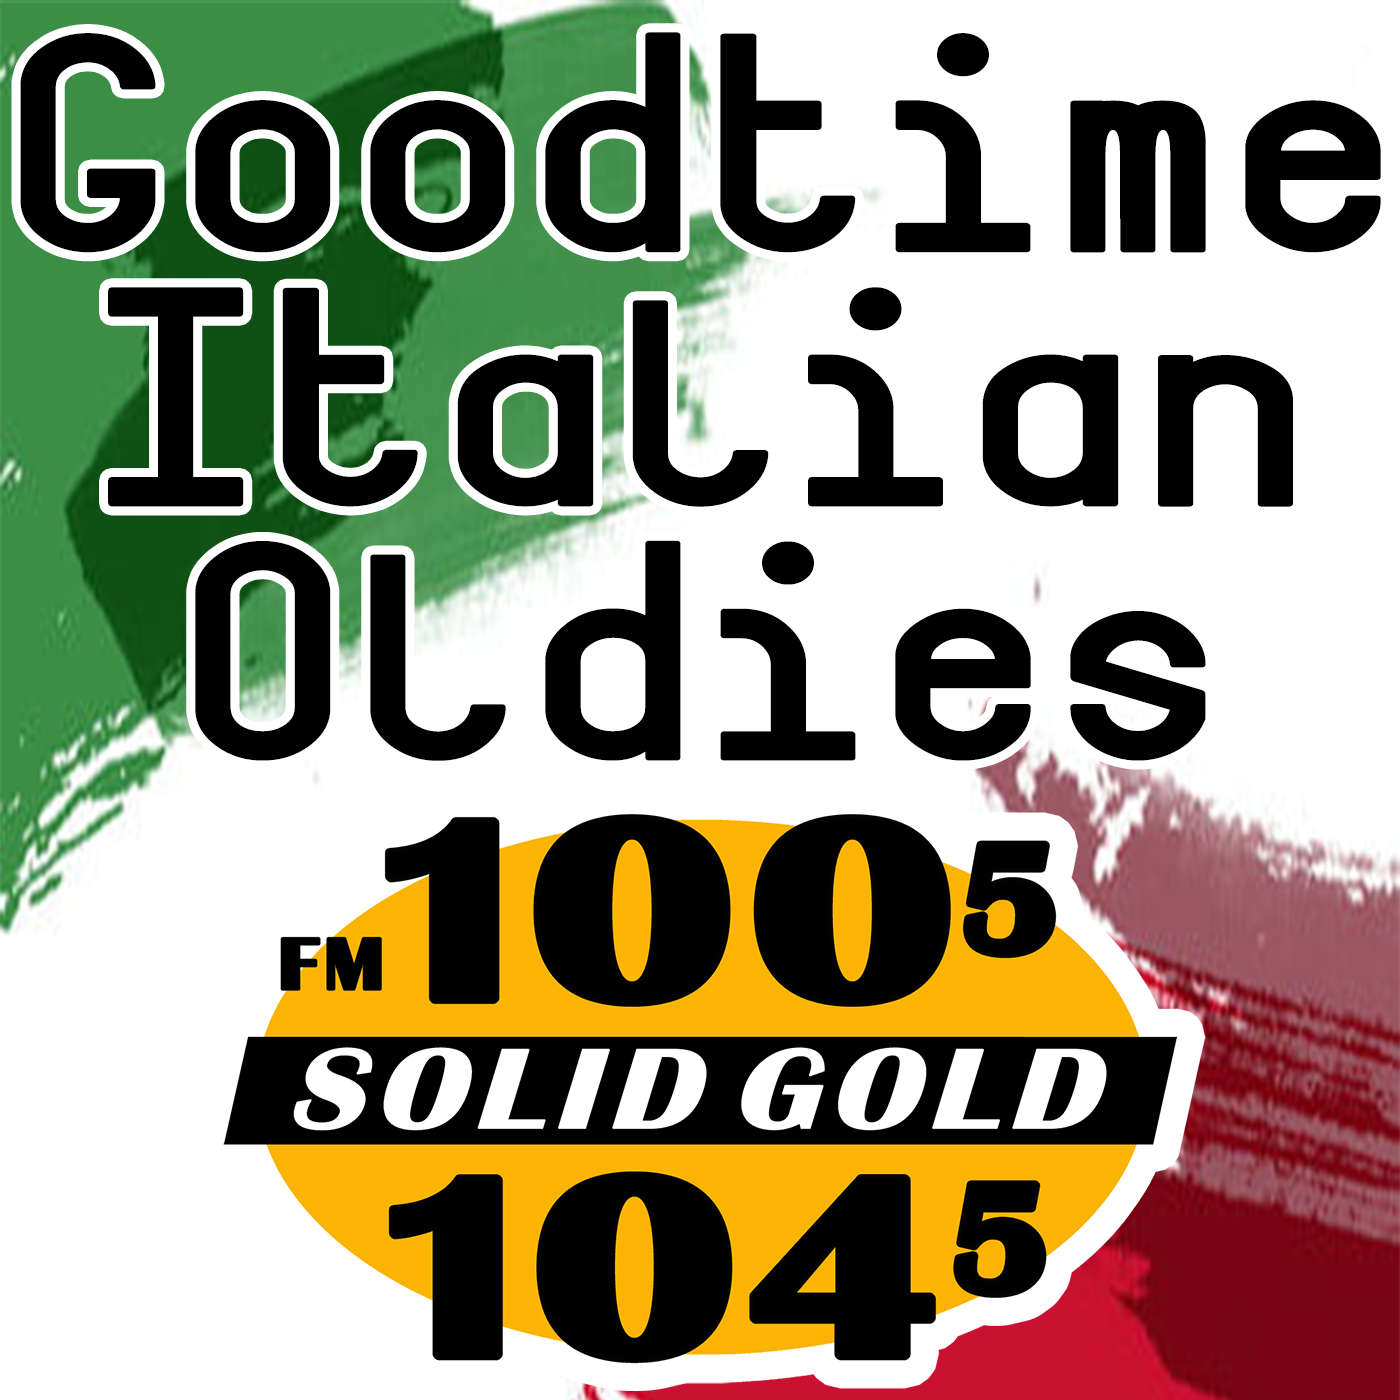 Goodtime Italian Oldies by Don Giovanni on SolidGold 100.5/104.5